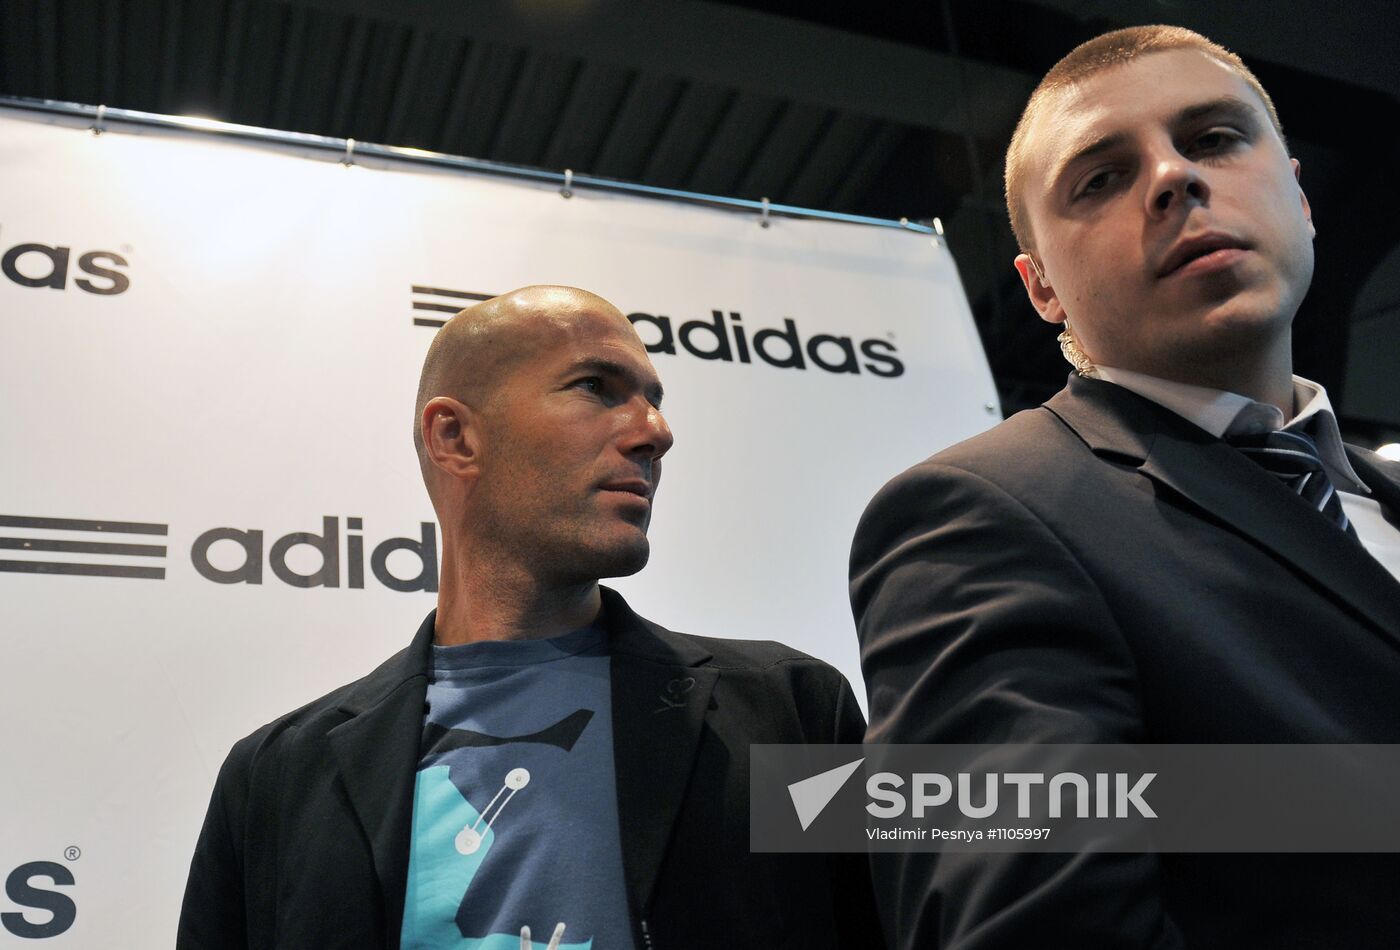 Adidas Brand Centre opens in Moscow